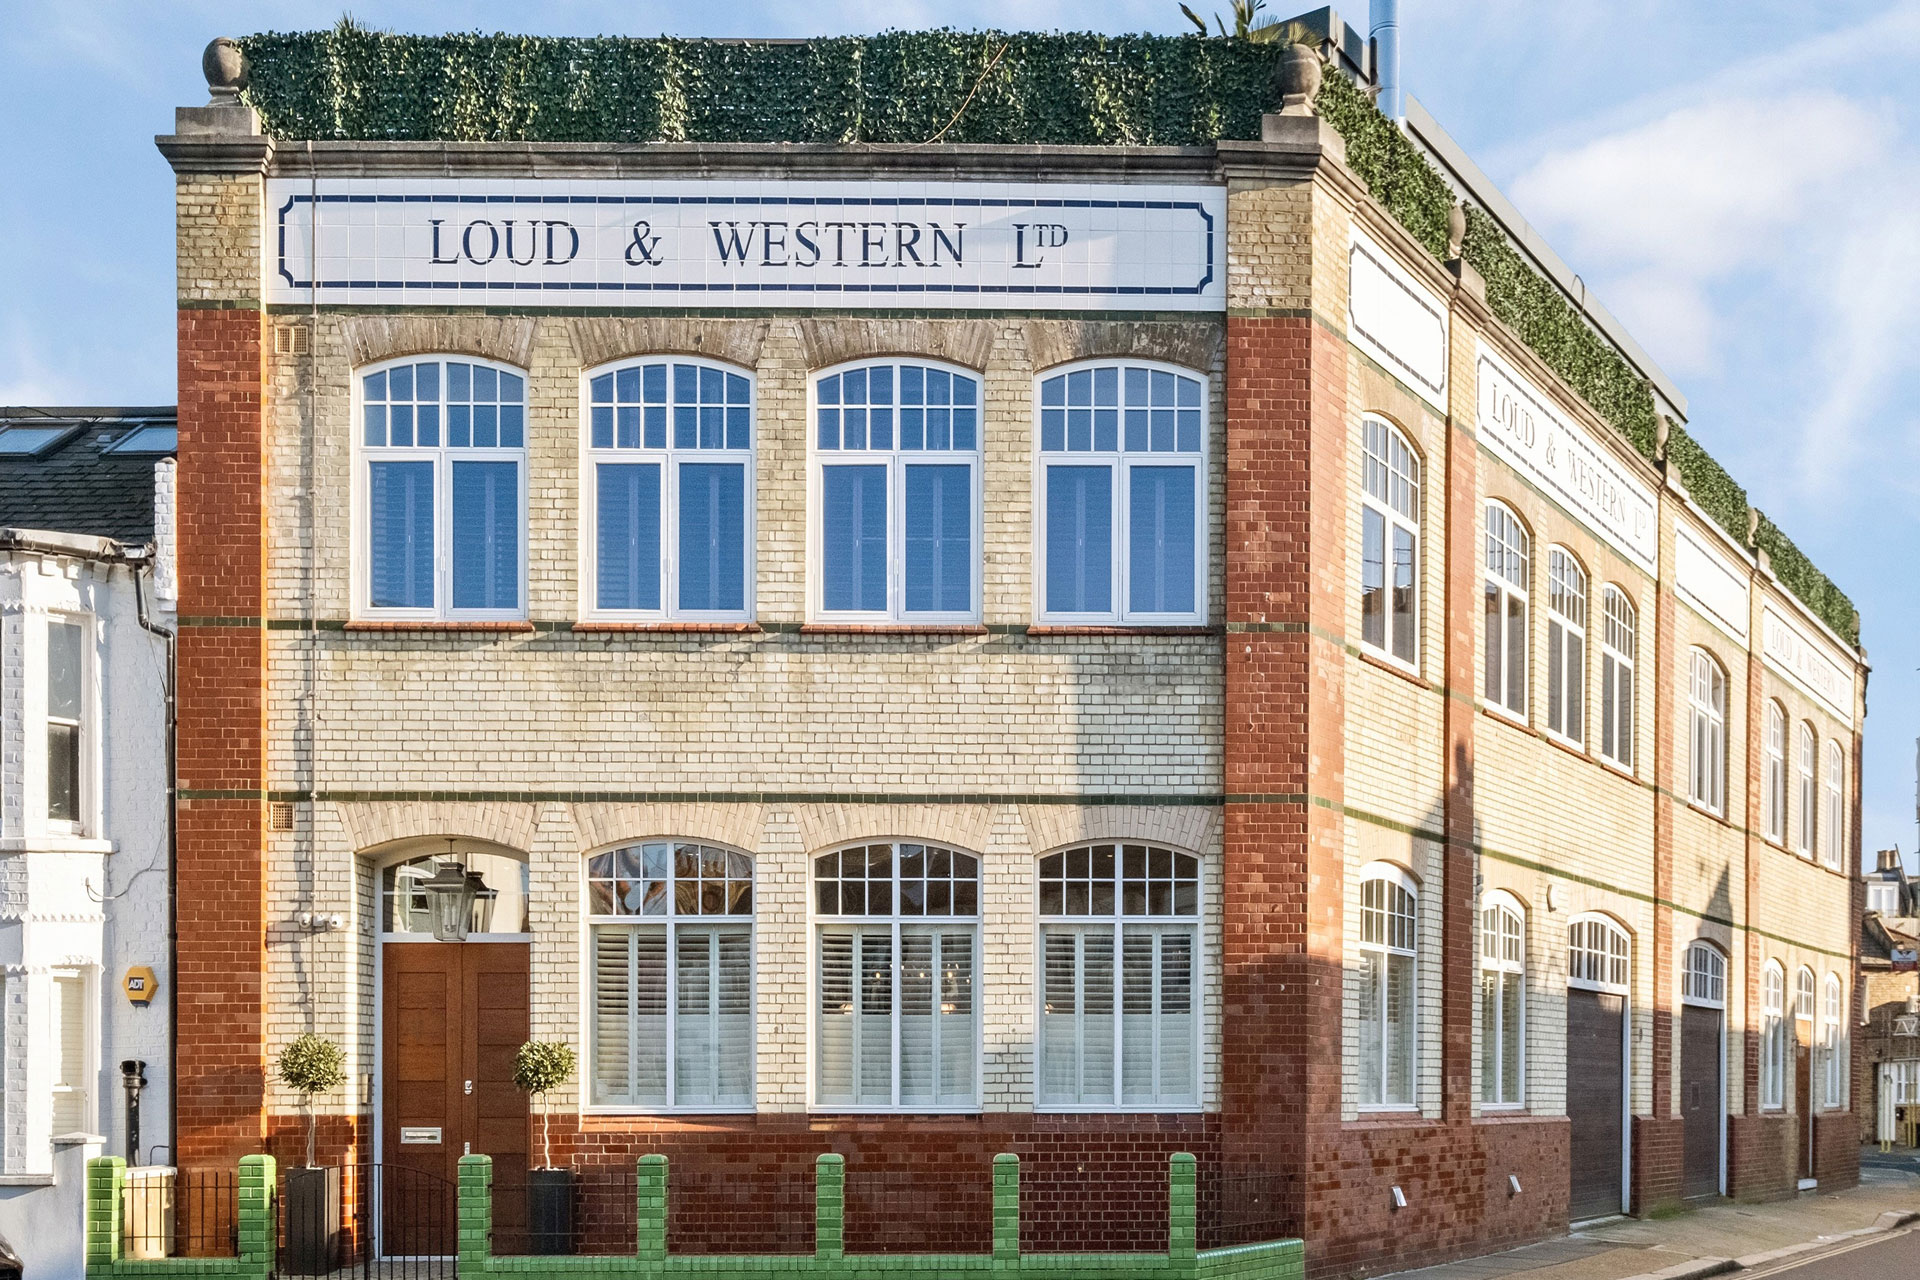 Former Victorian laundry factory with 'Loud & Western' logo on the facade